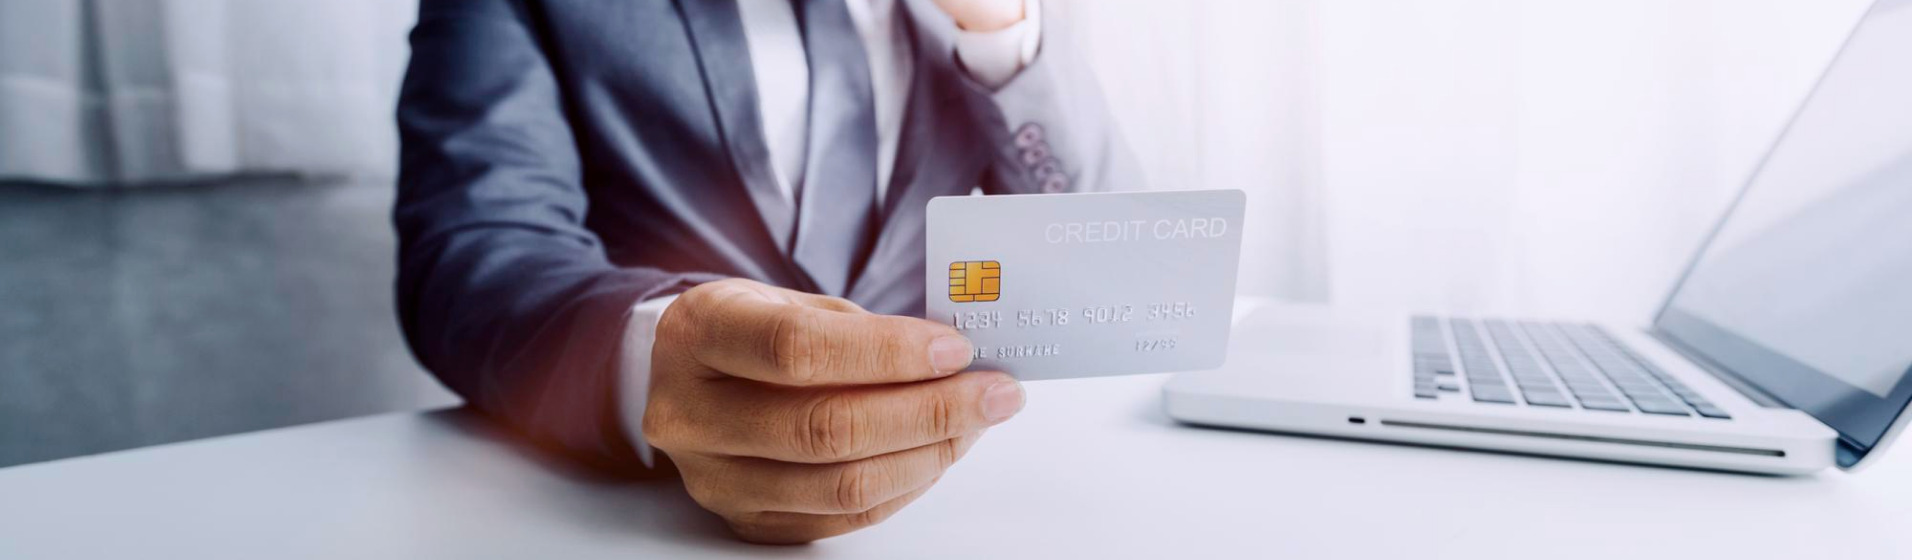 How To Establish Business Credit Without A Personal Guarantee